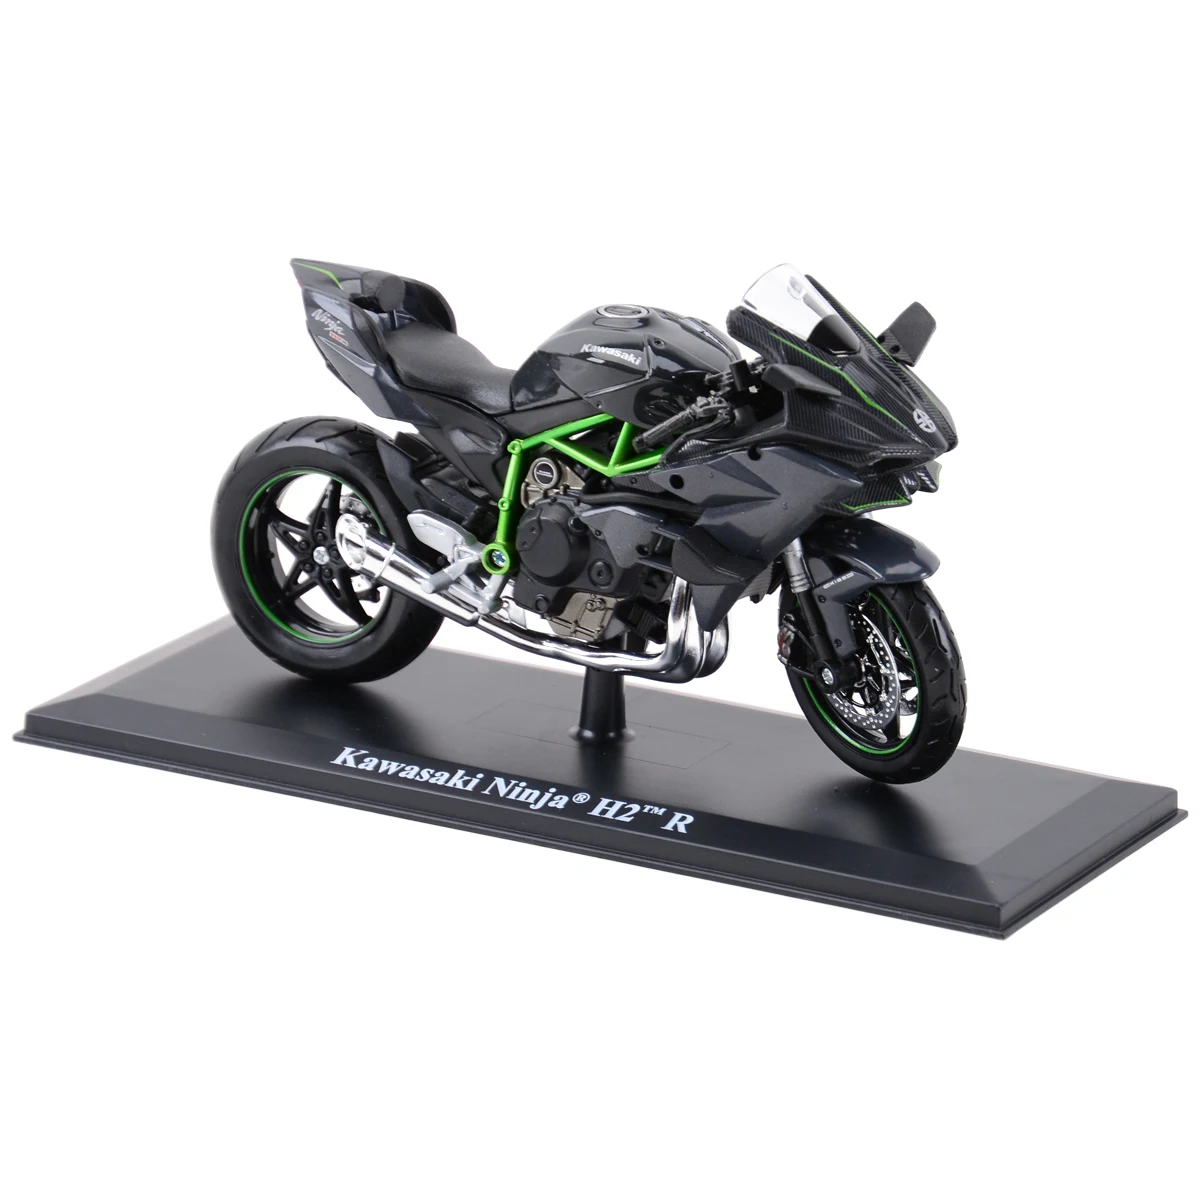 Maisto 1:12 Kawasaki Ninja H2 R With Stand Die Cast Vehicles Collectible Hobbies Motorcycle Model Toys